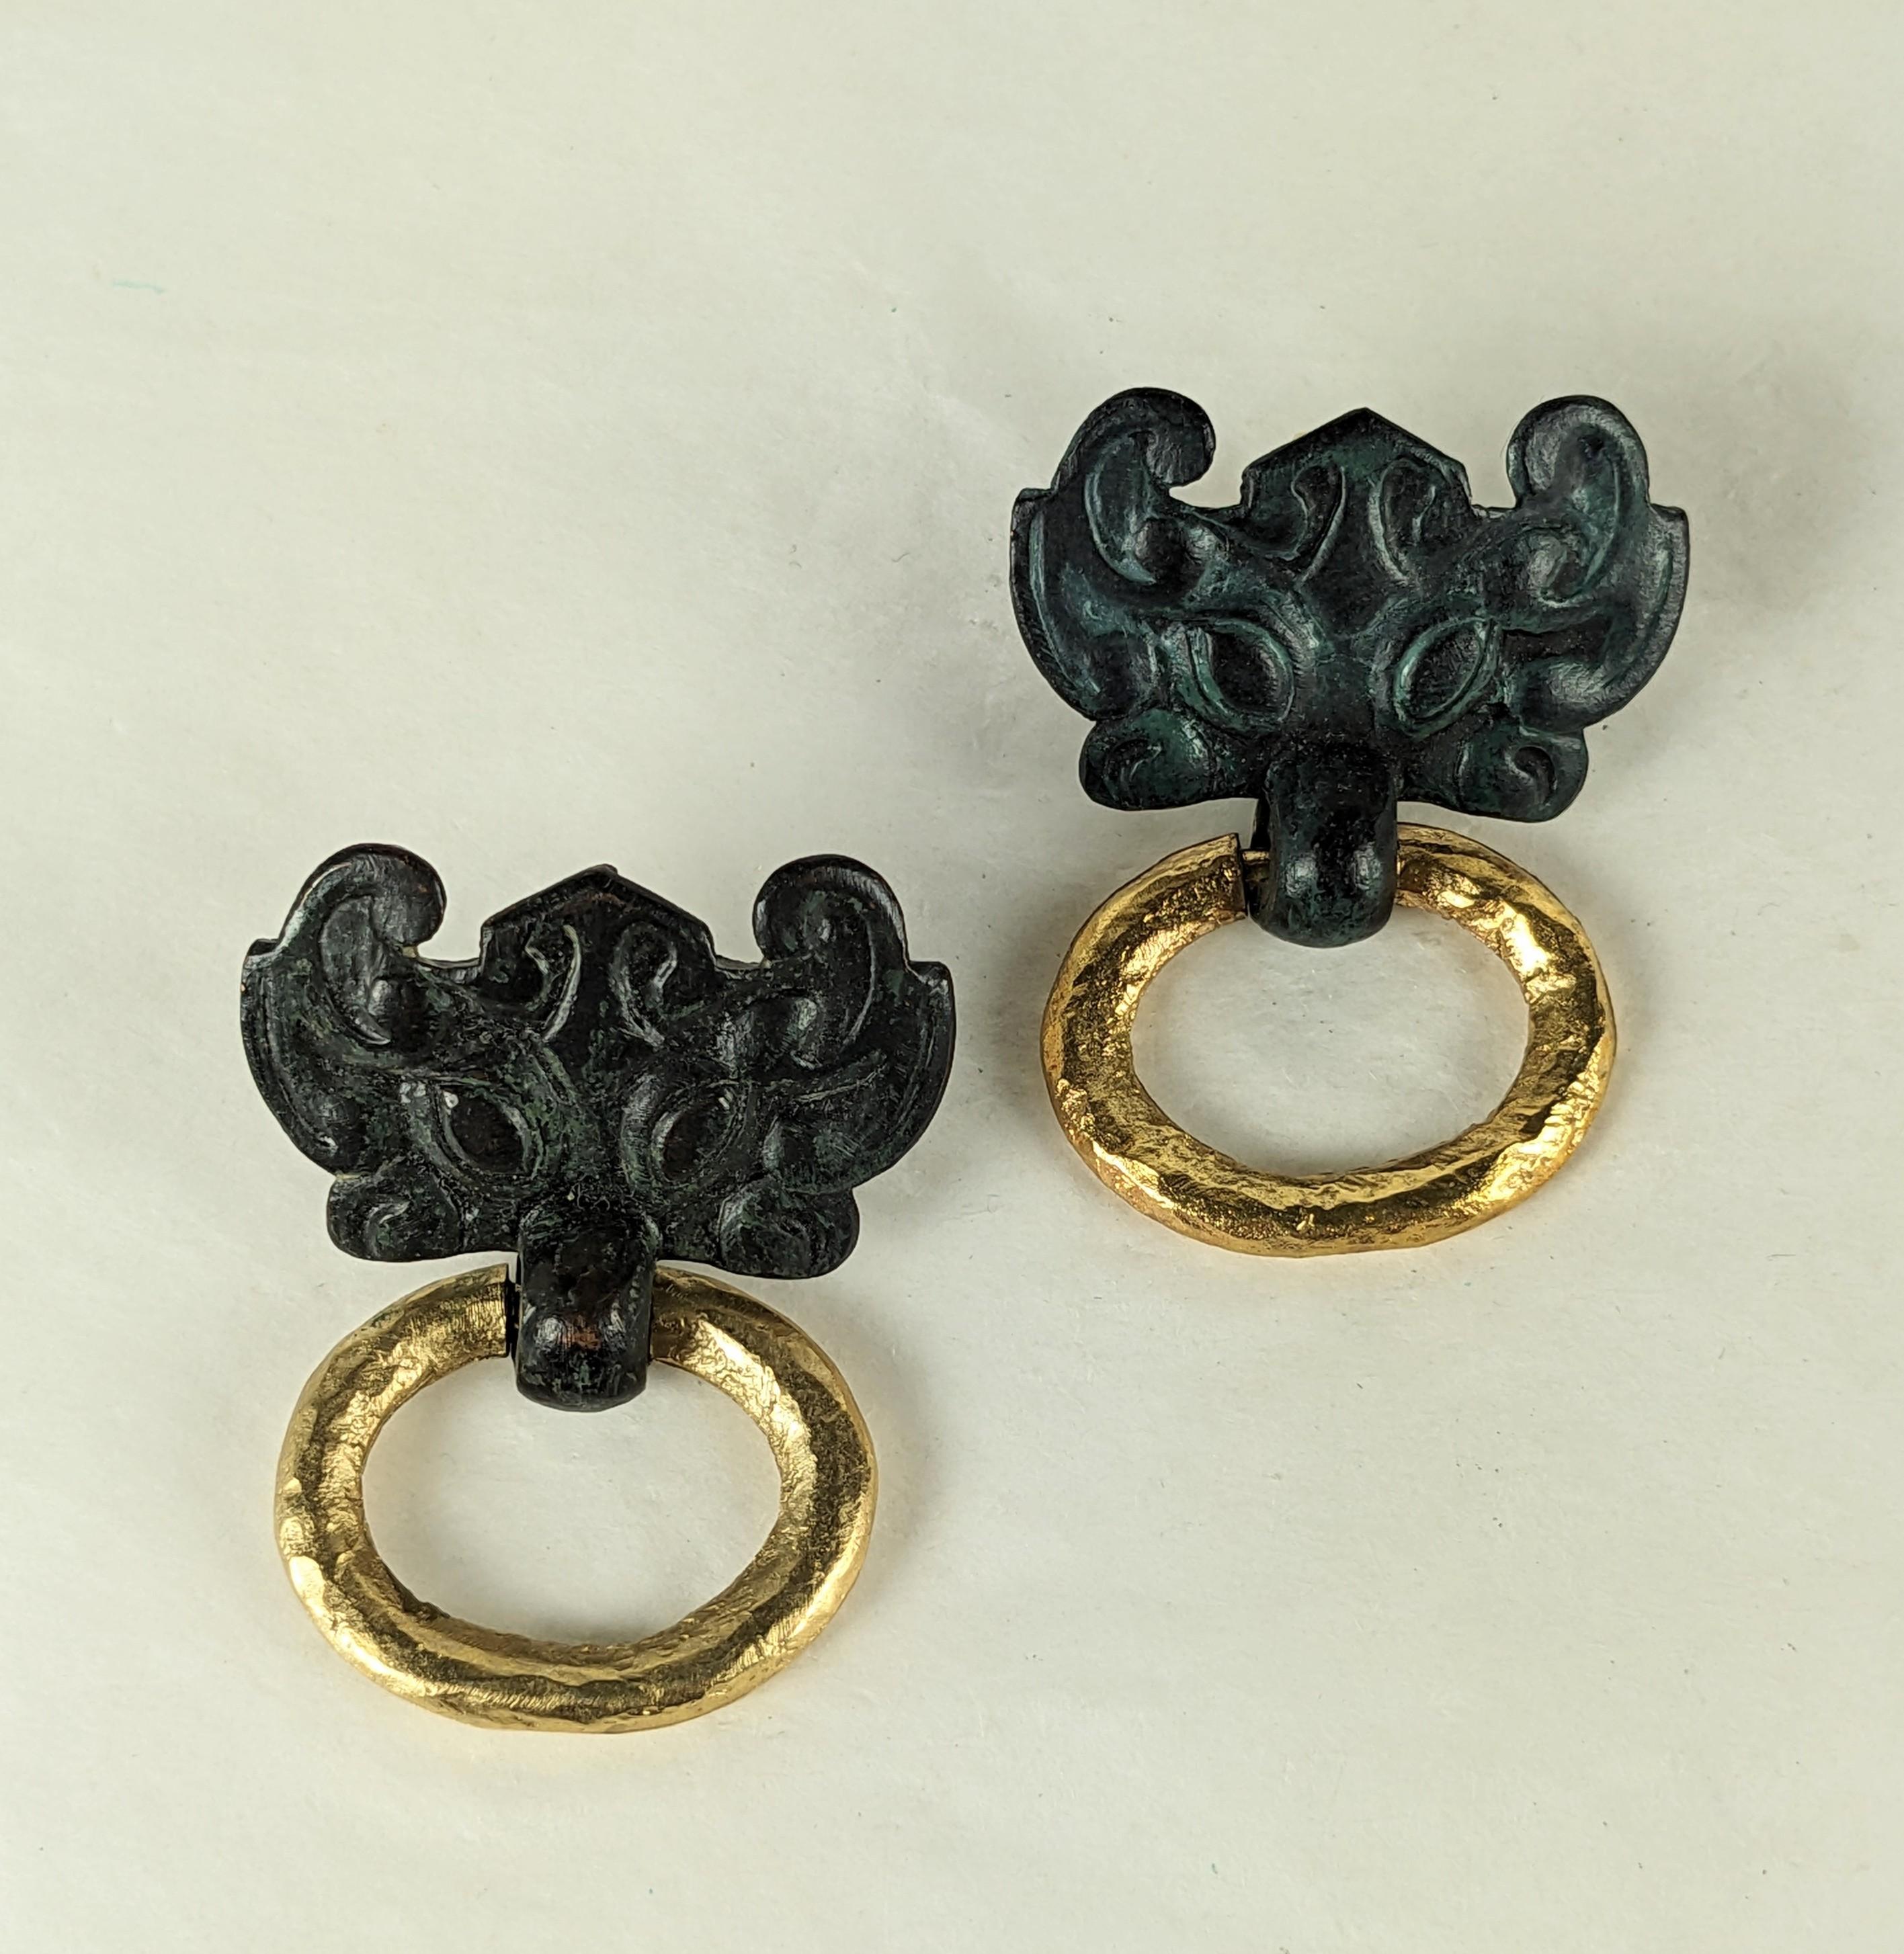 Diane Love for Trifari Ancient Chinese Motif clip earrings with bronze finish bats with hammered gold link drops.  1.75